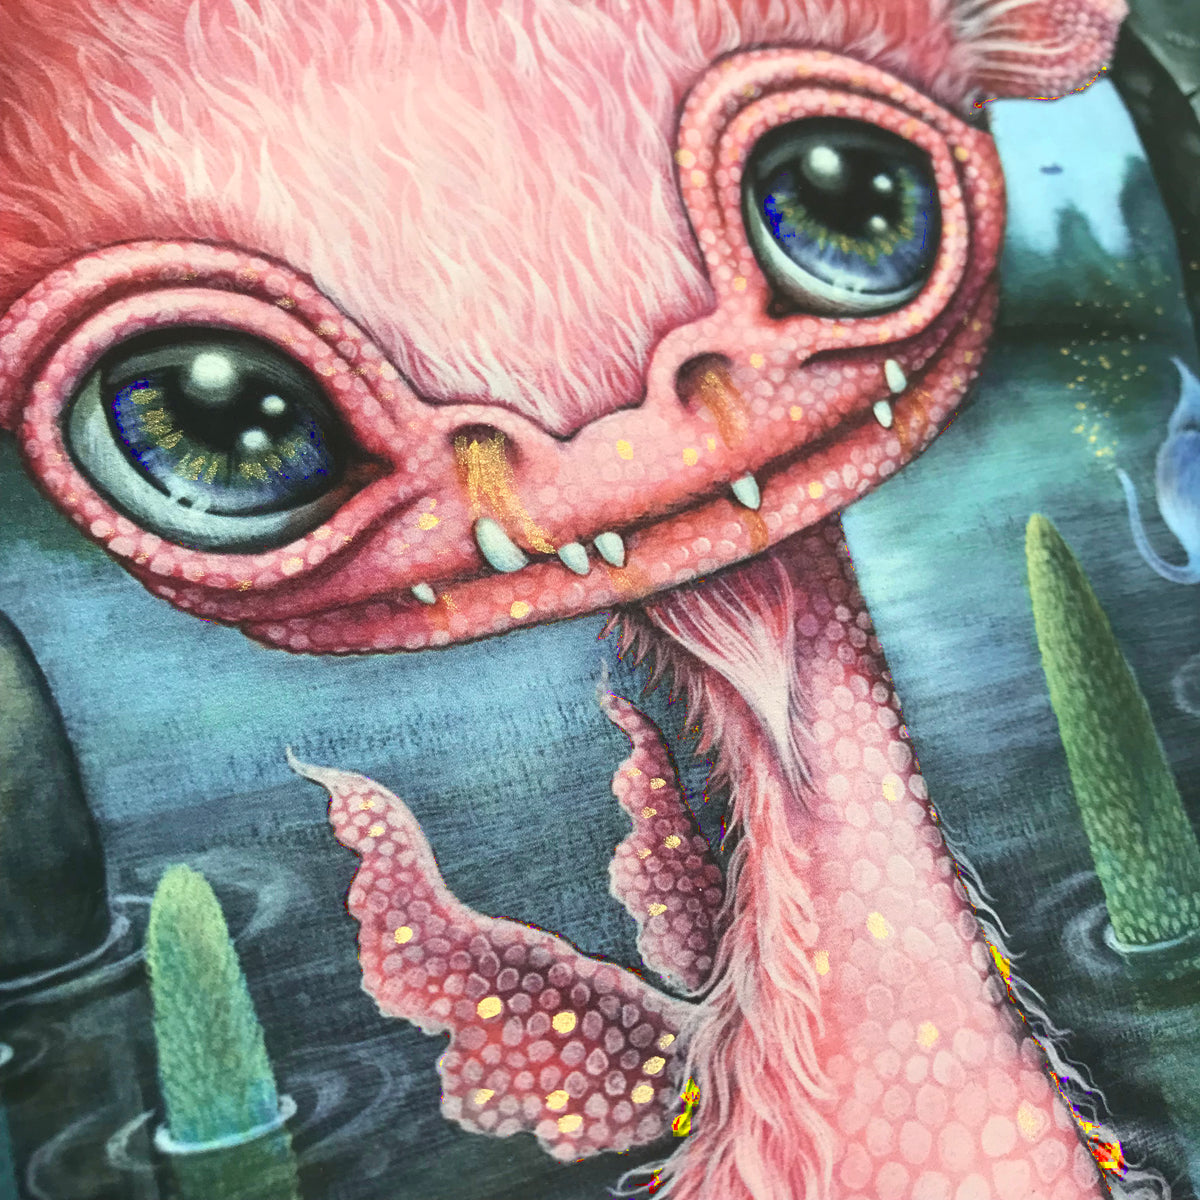 Laura Colors &quot;Curious Beast&quot; - Hand-Embellished Edition of 10 - 12 x 17&quot;